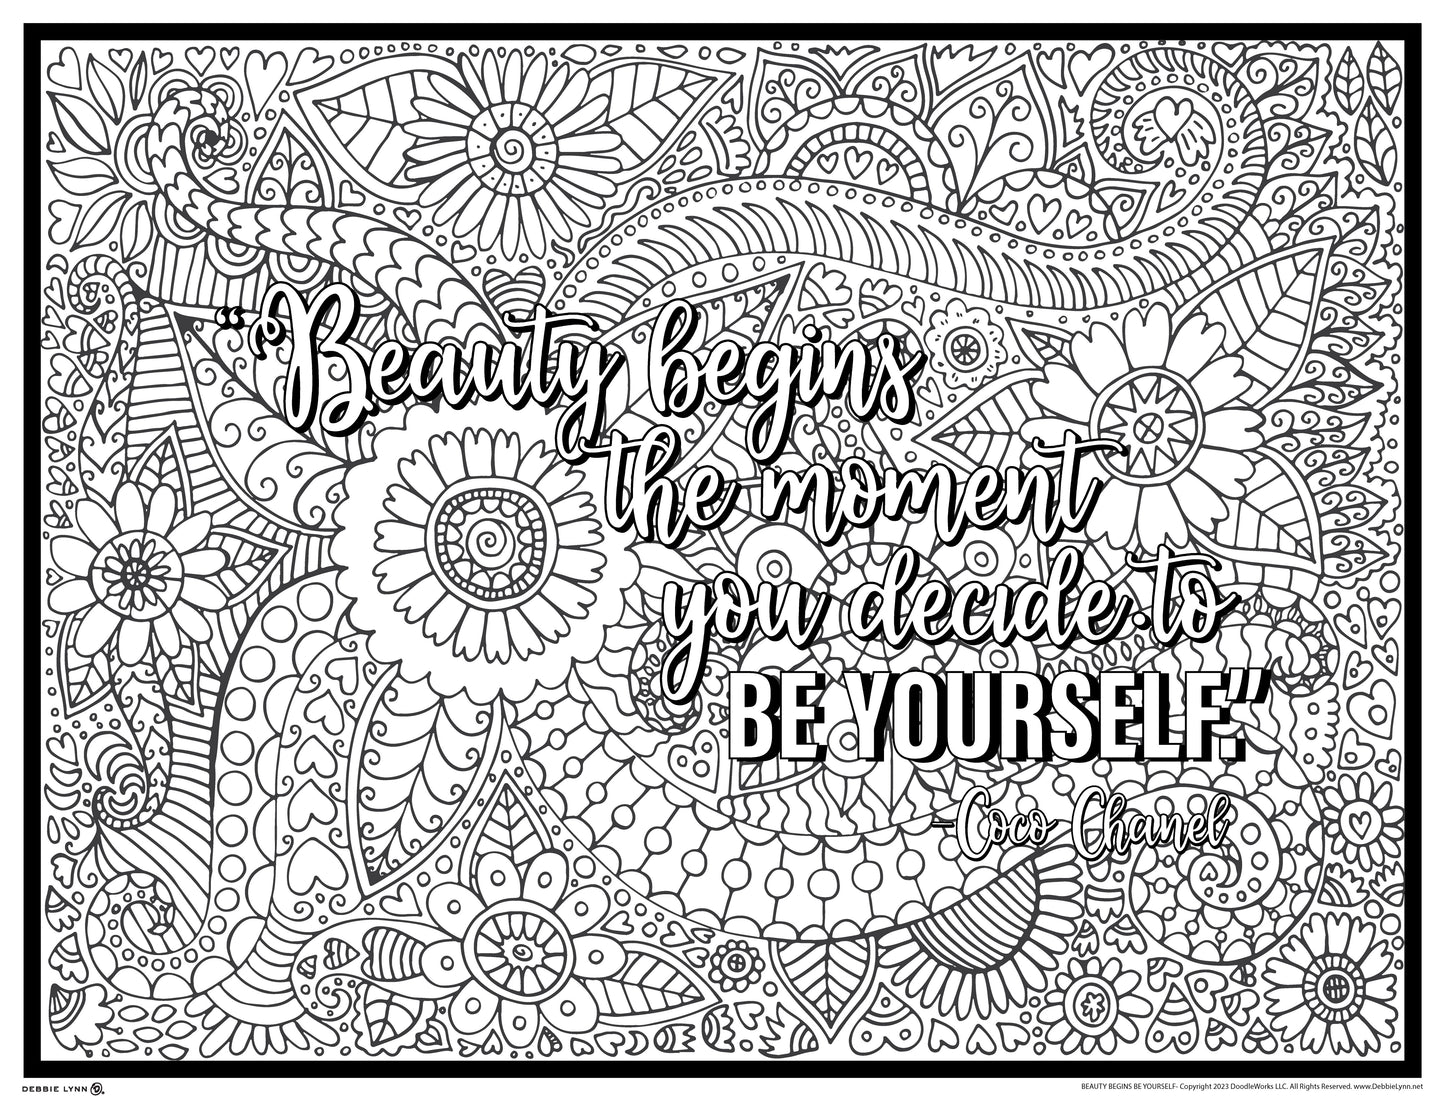 Beauty Begins Be Yourself Personalized Giant Coloring Poster 46" x 60"